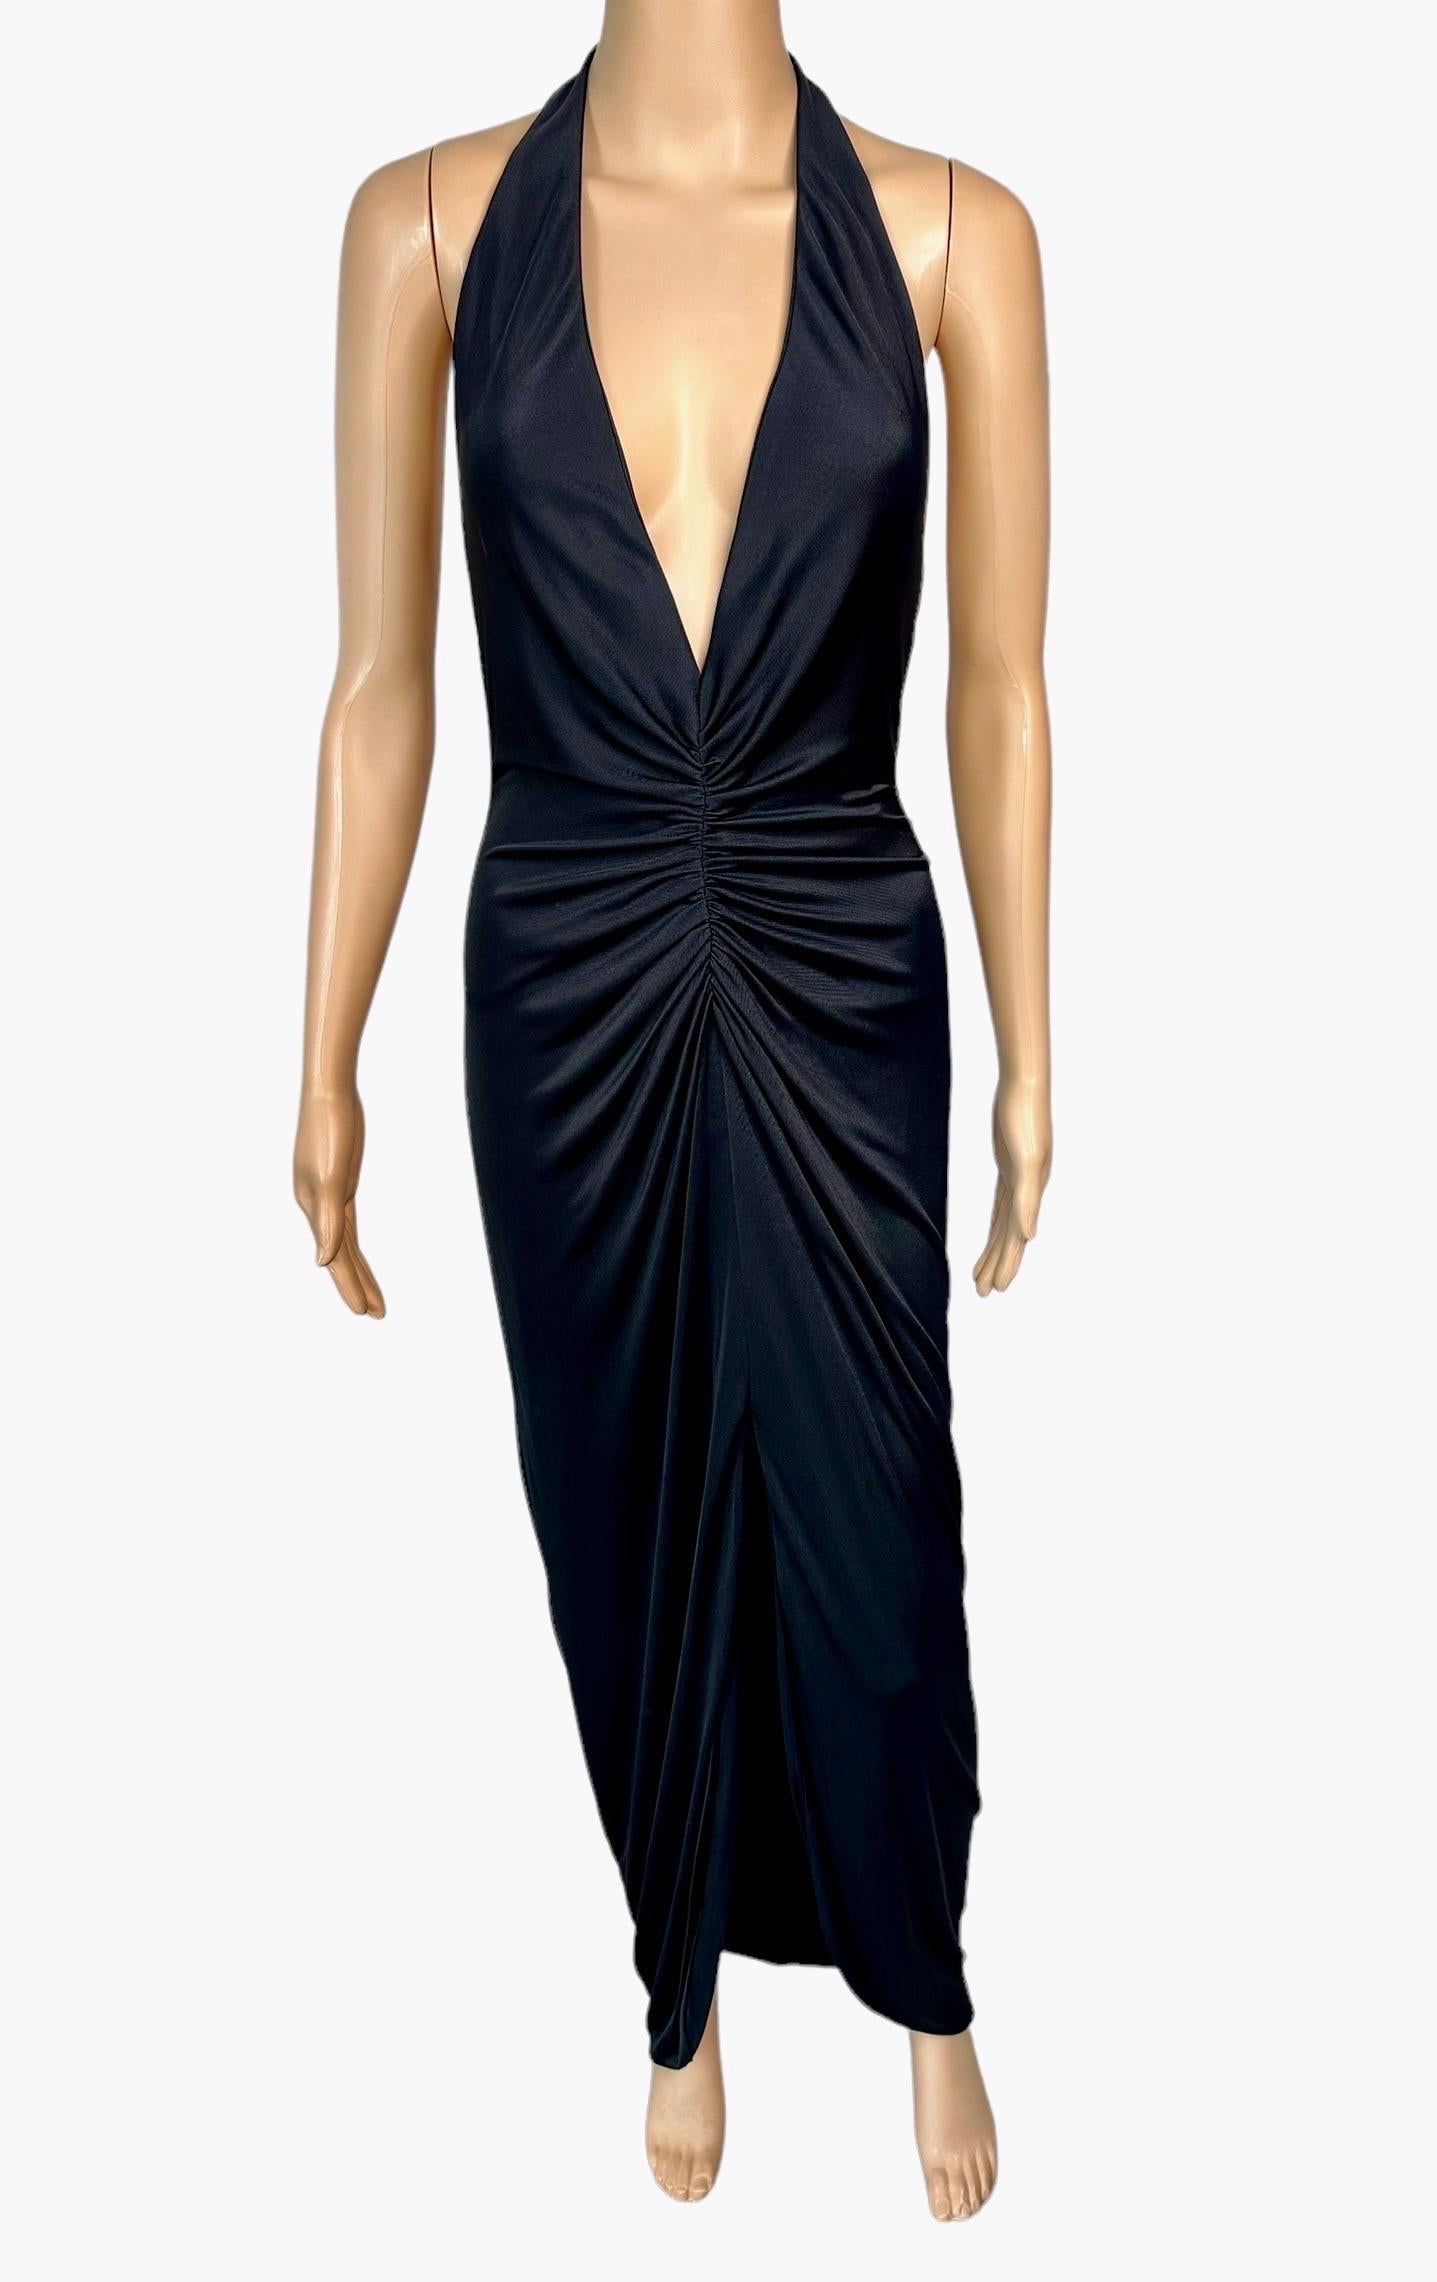 Versace S/S 2005 Runway Plunging Hi-Low Ruched Open Back Evening Dress Gown 4